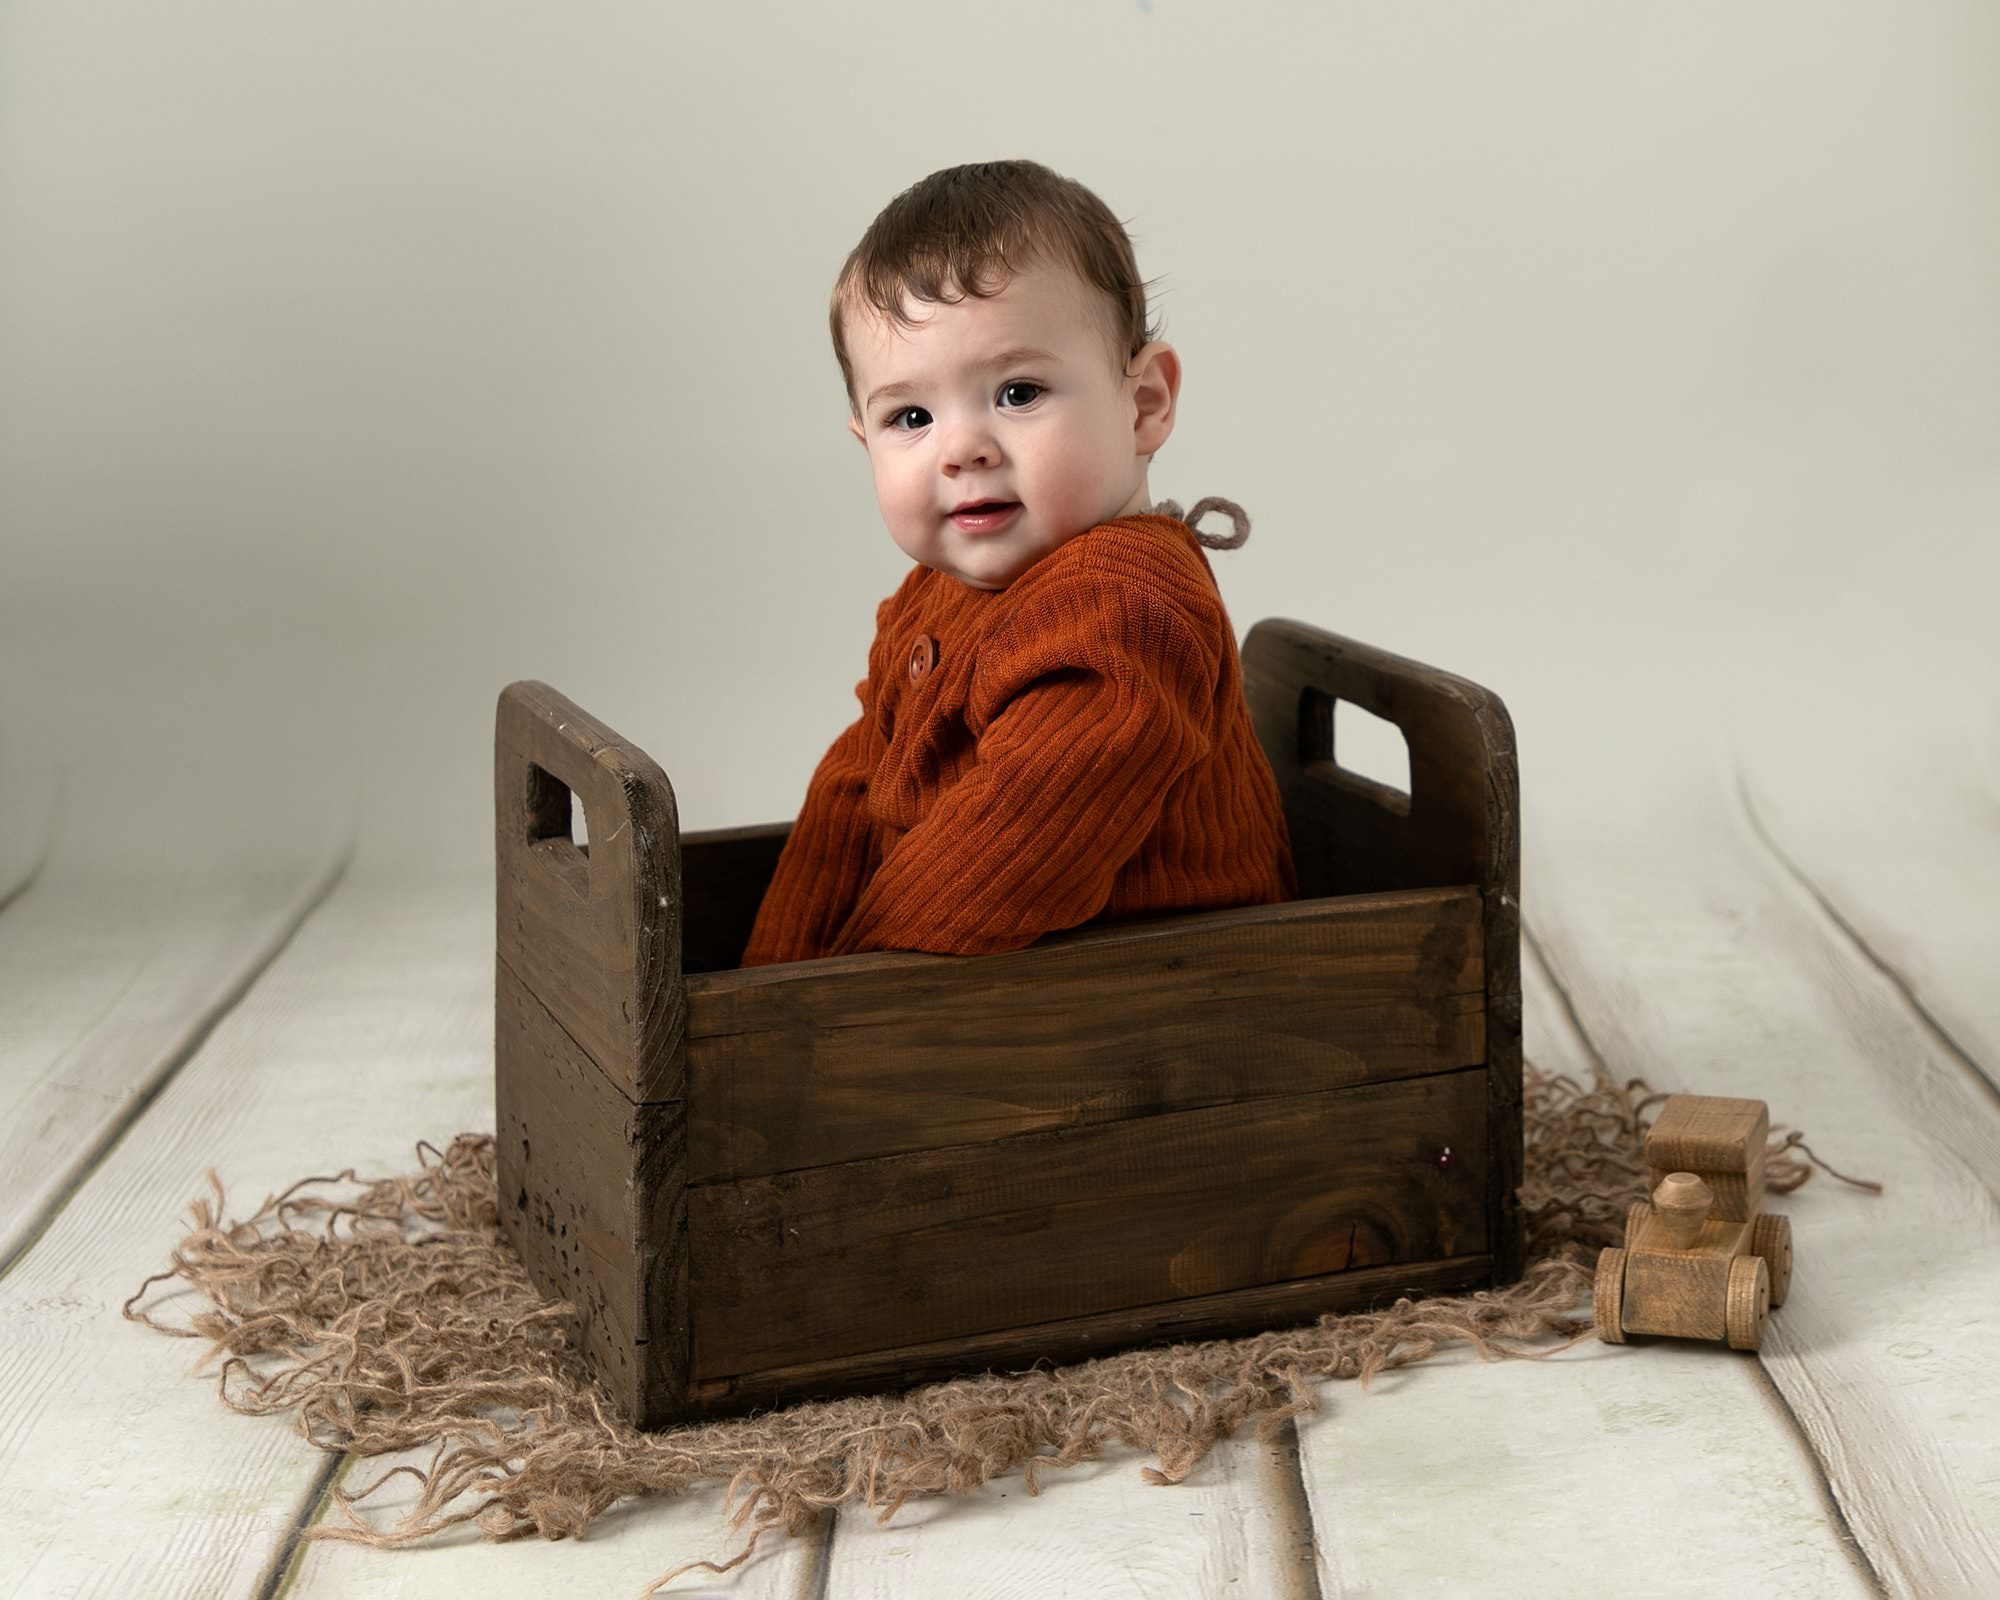 Baby boy wearing a rust romper sat in a brown crate on a cream backdrop.